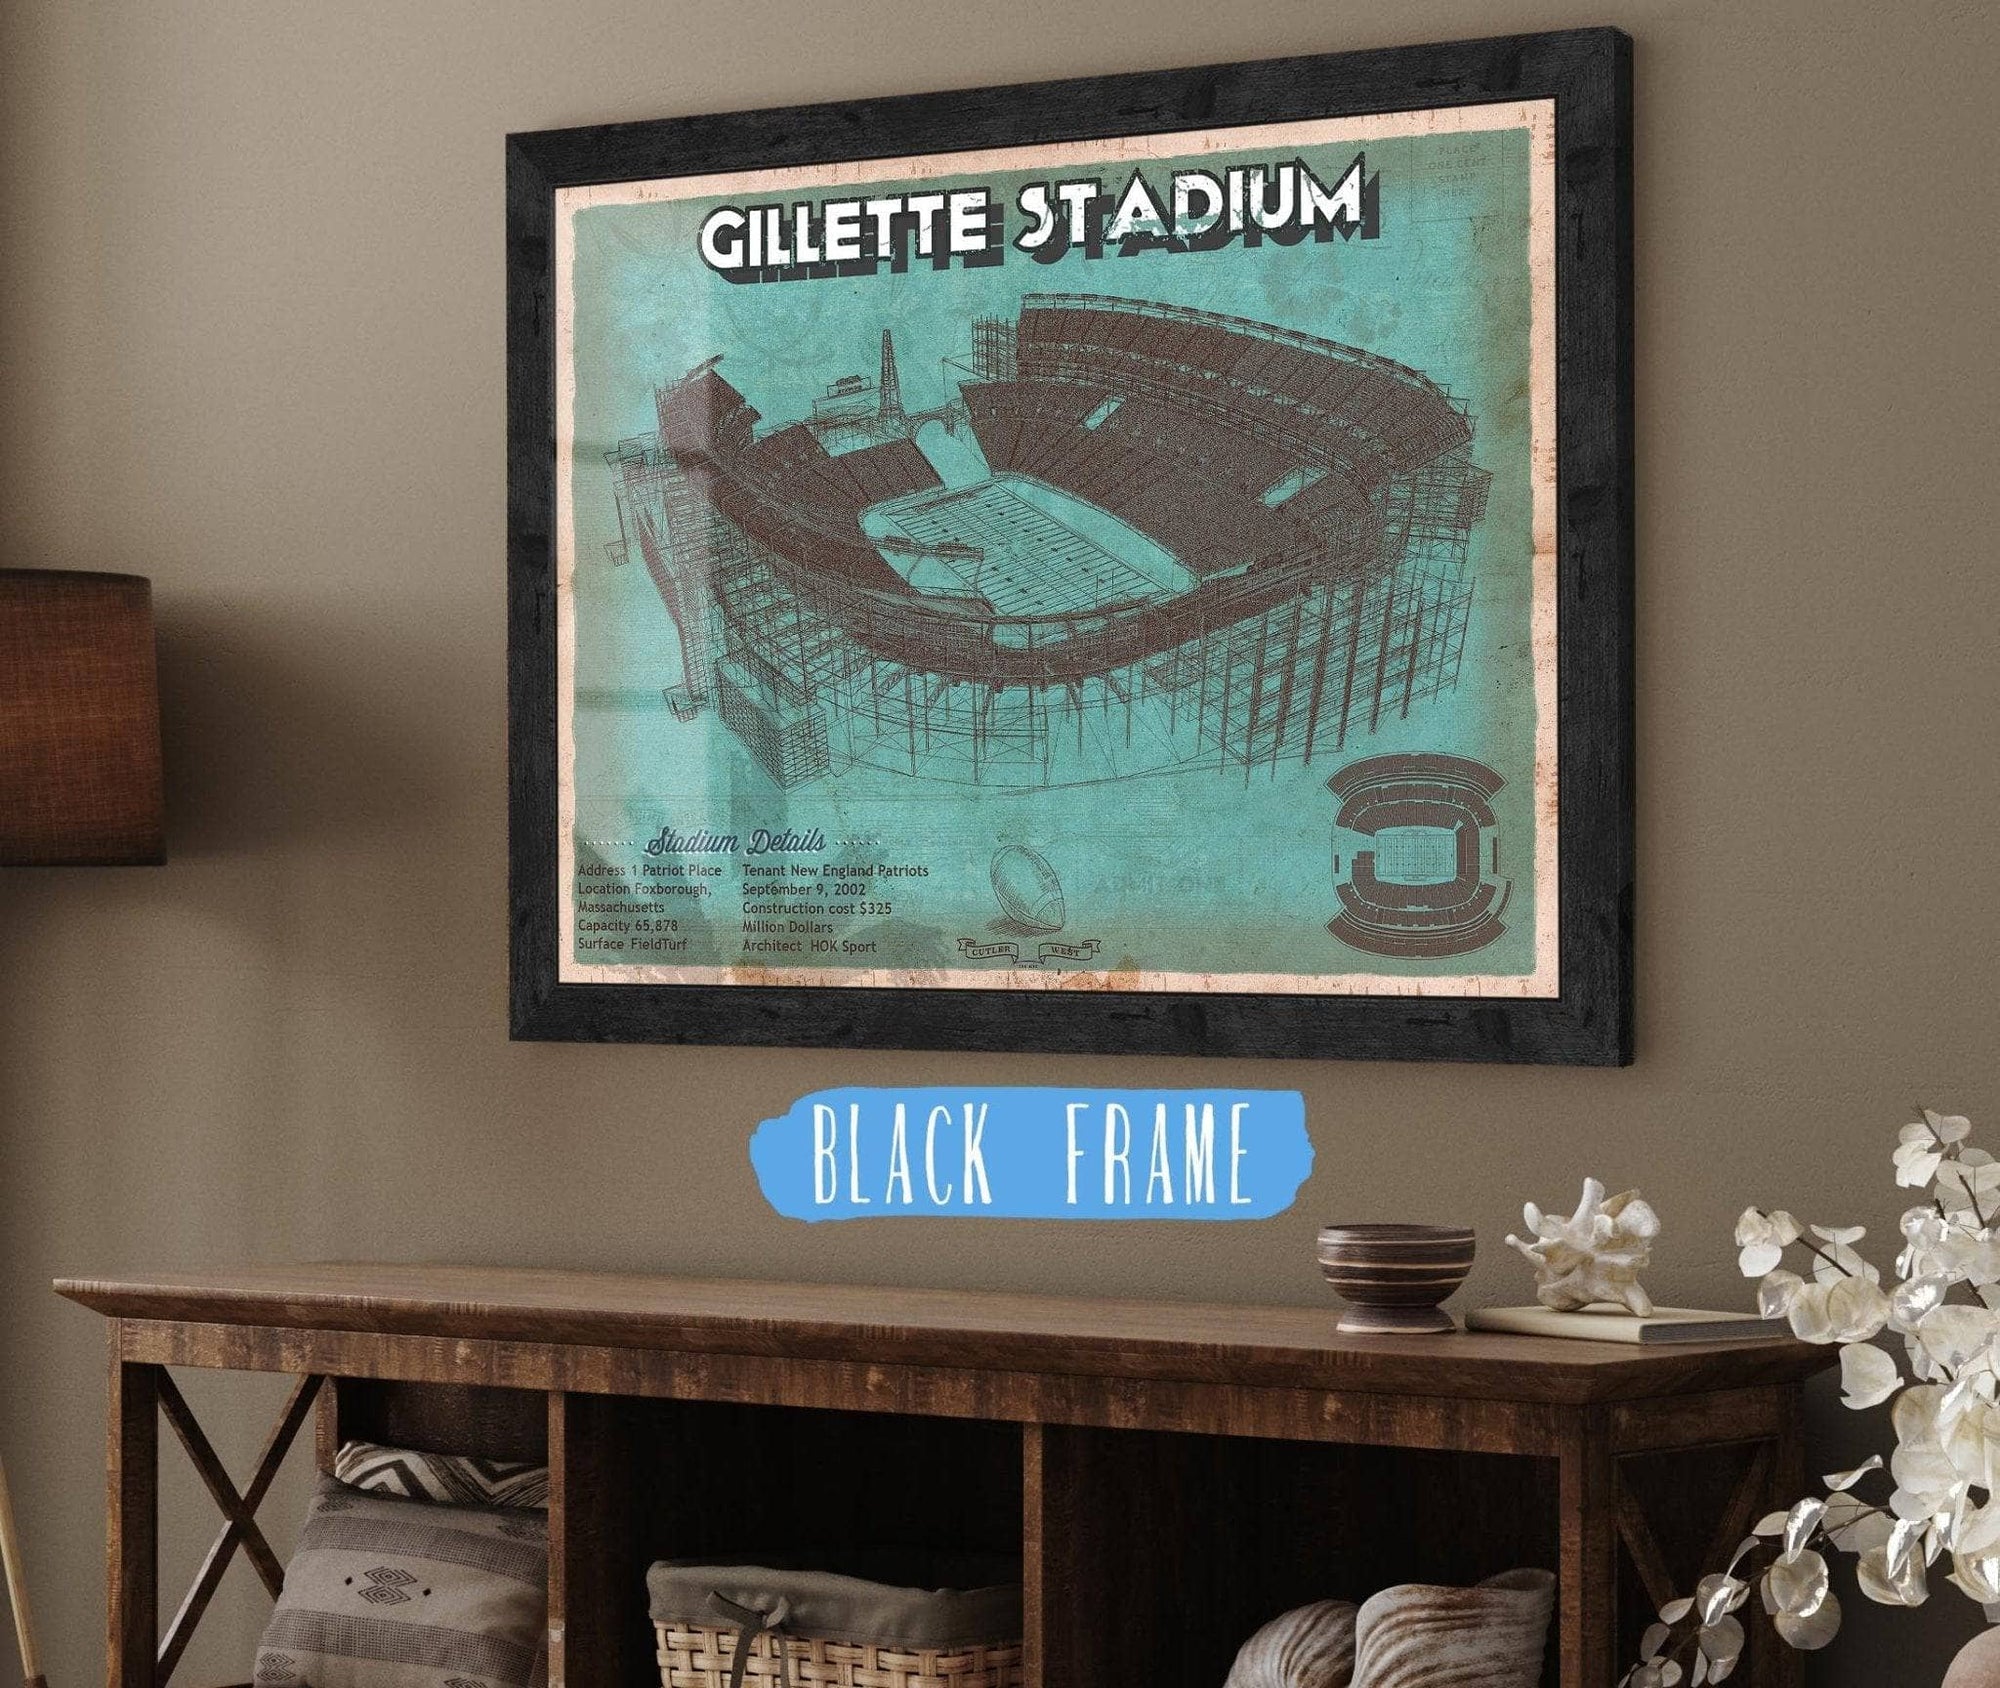 Cutler West Pro Football Collection 14" x 11" / Black Frame New England Patriots Gillette Stadium Seating Chart - Vintage Football Team Color Print 692087079_63455